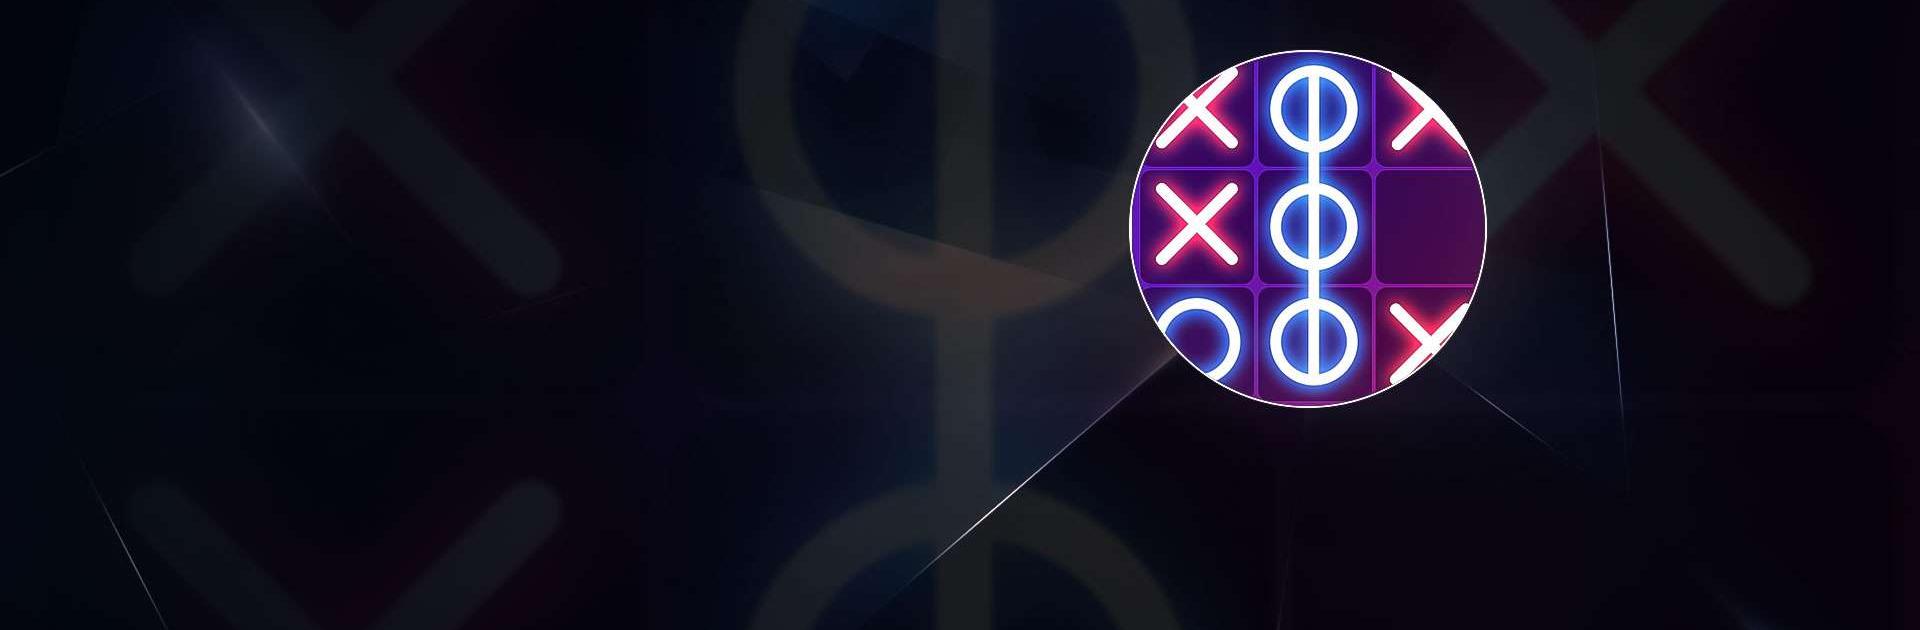 Download and play Tic Tac Toe Glow: 2 Player XO on PC & Mac